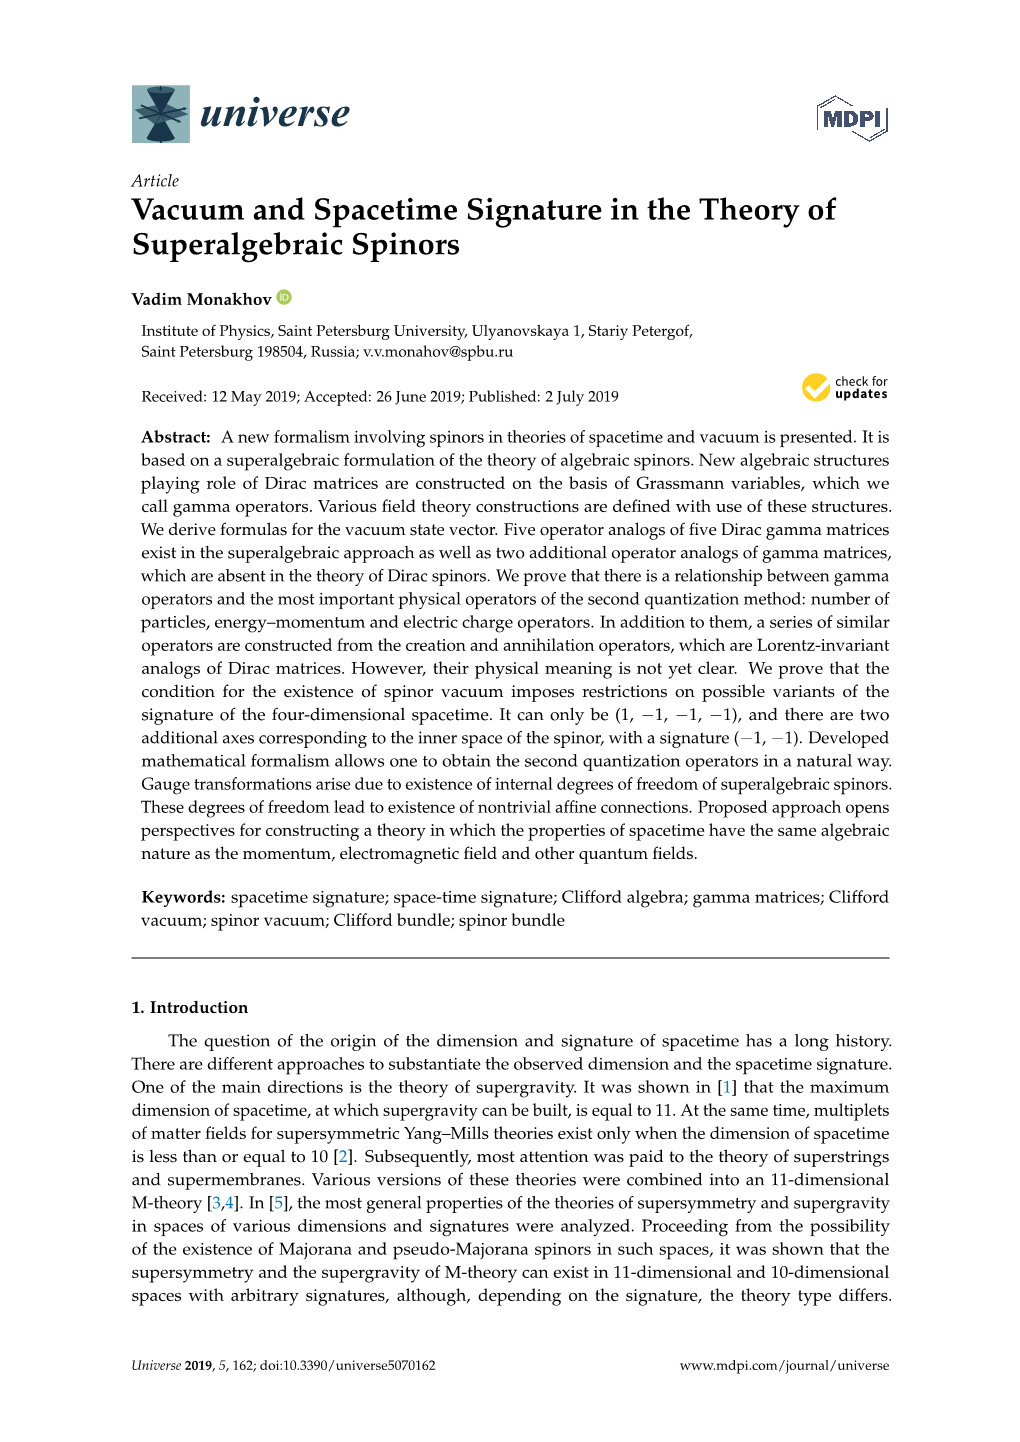 Vacuum and Spacetime Signature in the Theory of Superalgebraic Spinors